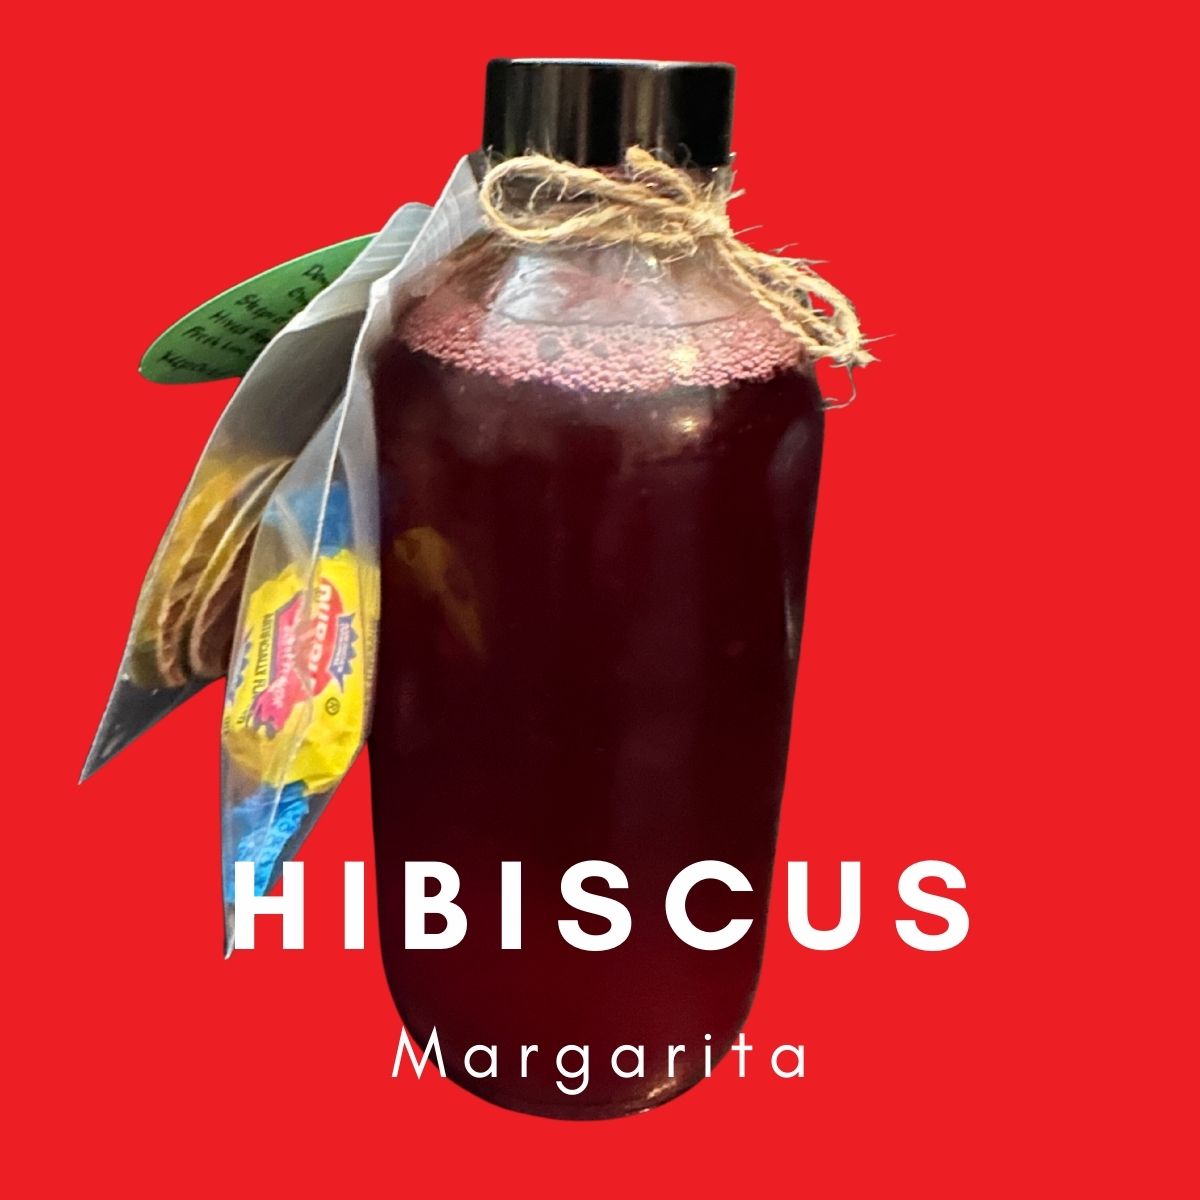 A bottle of Hibiscus Berry Margarita RTD Cocktail mix against a red background, labeled with "HIBISCUS Margarita". The bottle has a burlap tie and a decorative leaf attached.